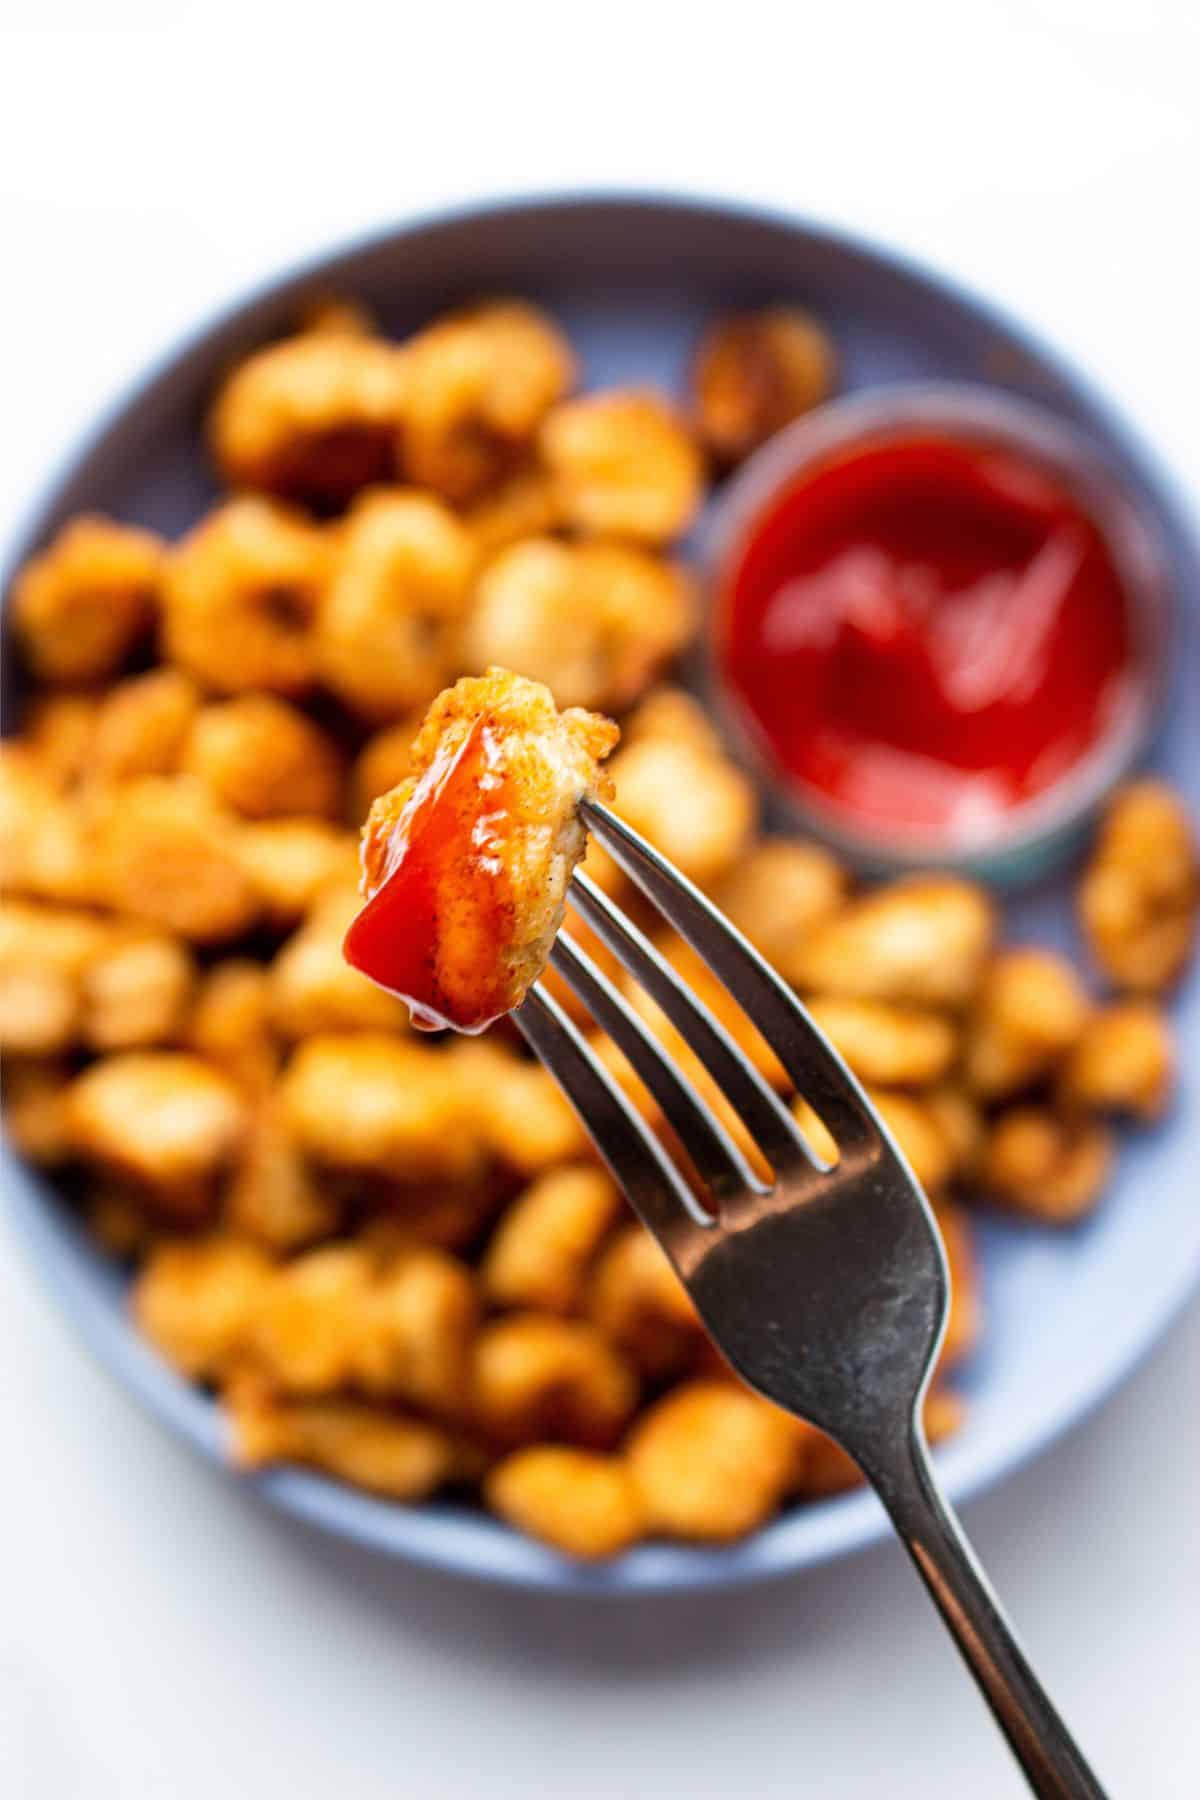 Close up of a pop corn chicken piece on fork with tomato ketchup over plateful of chicken pieces with tomato ketchup faded from view.